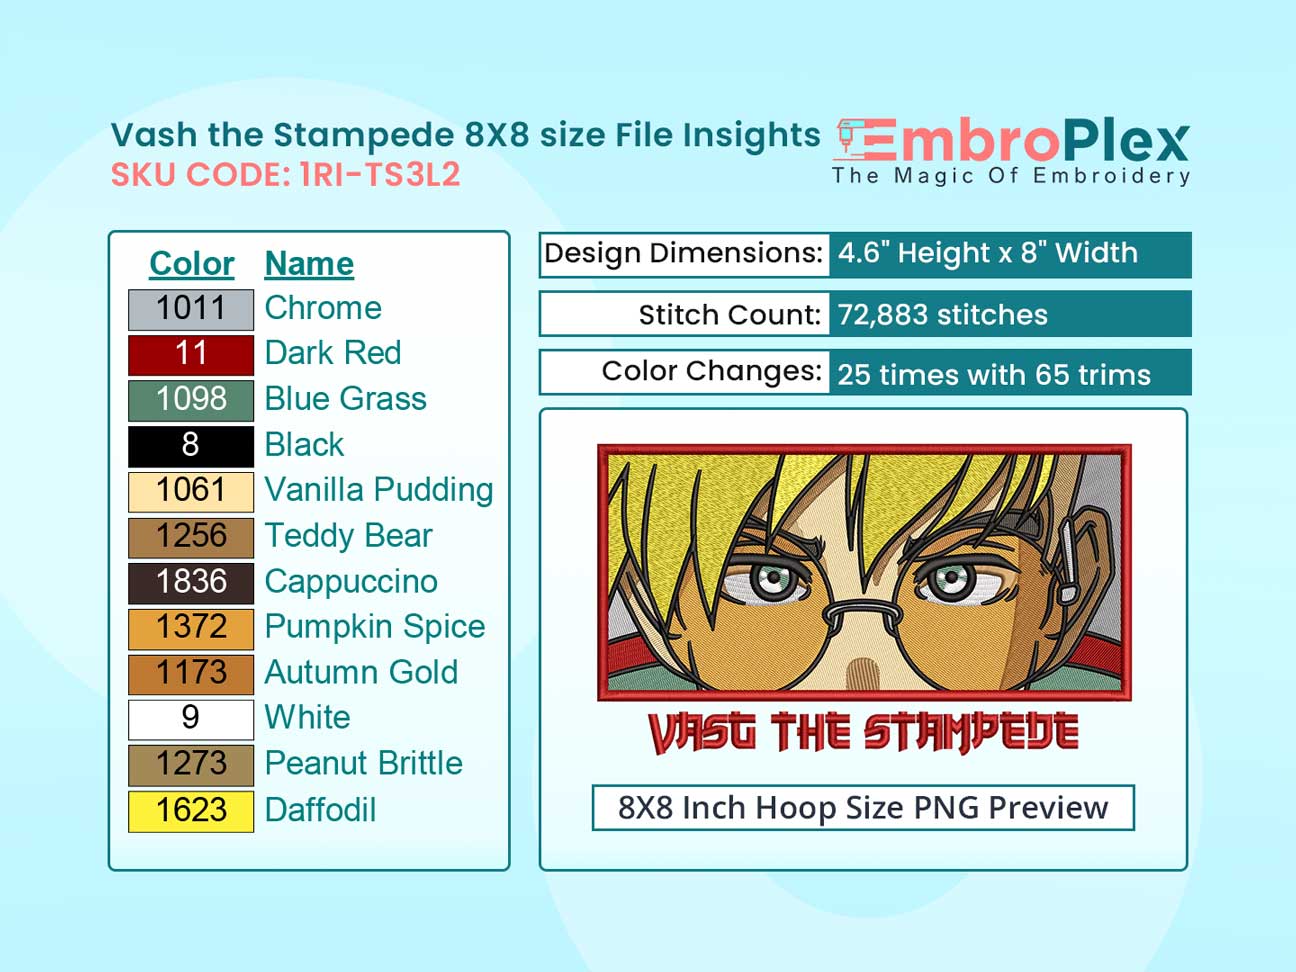 Anime-Inspired Vash the Stampede Embroidery Design File - 8x8 Inch hoop Size Variation overview image